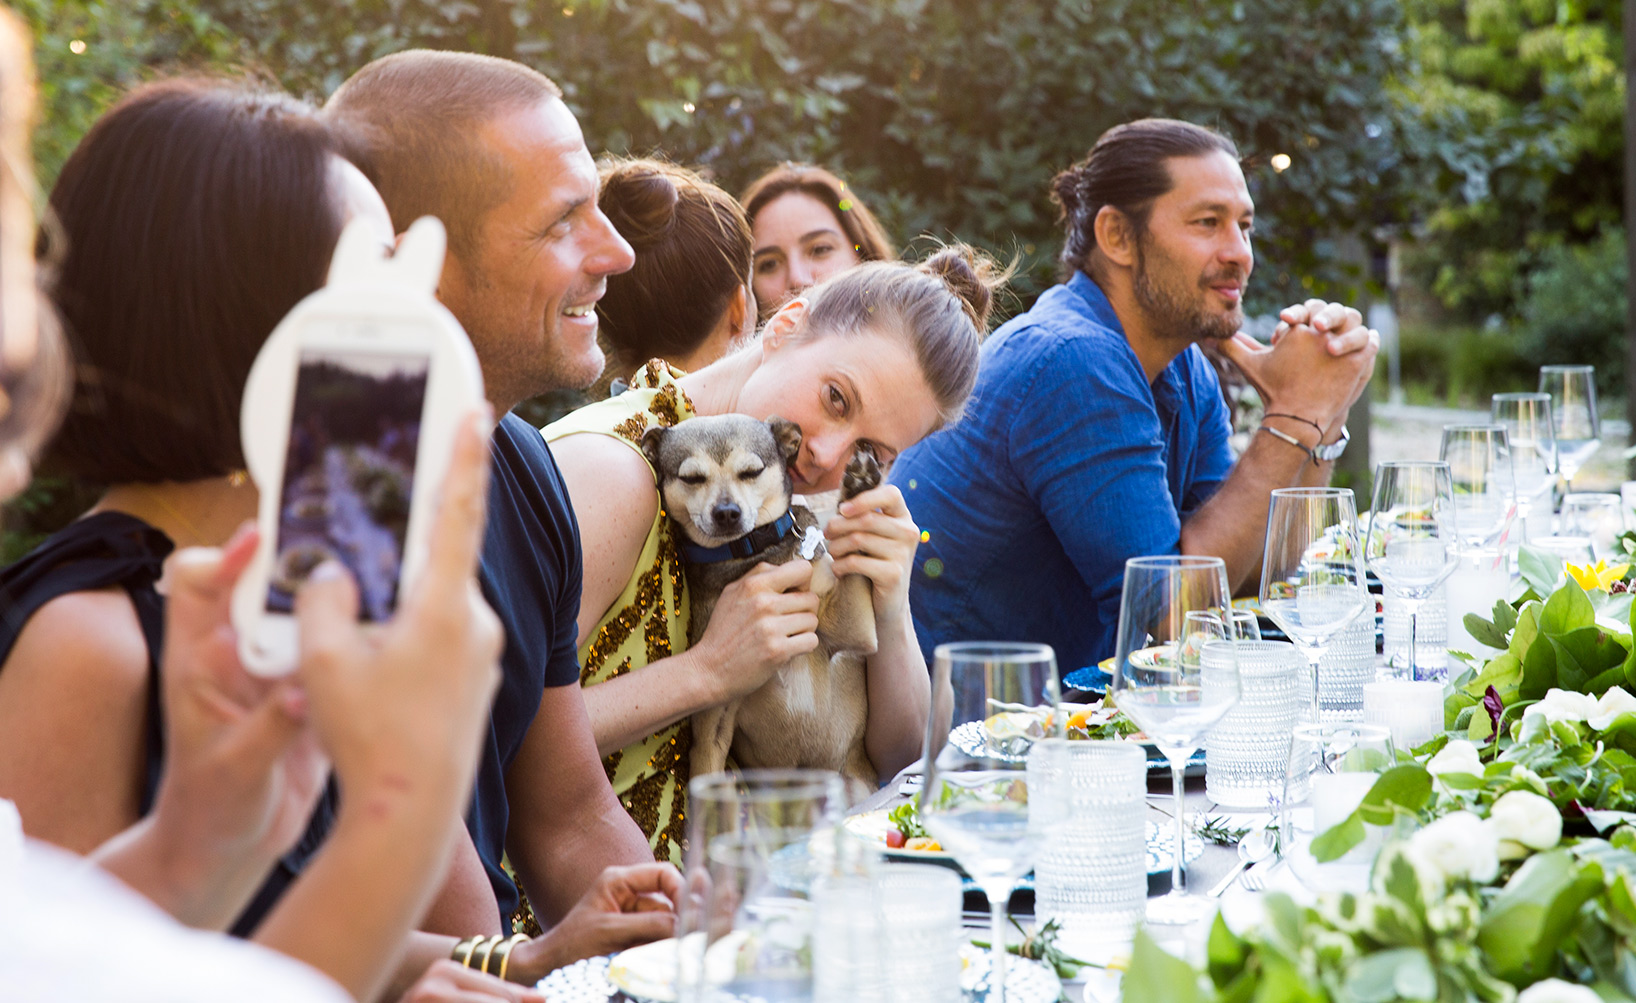 Elettra Rossellini Wiedemann  photographed entertaining at an outdoor table with friends in the Hamptons.